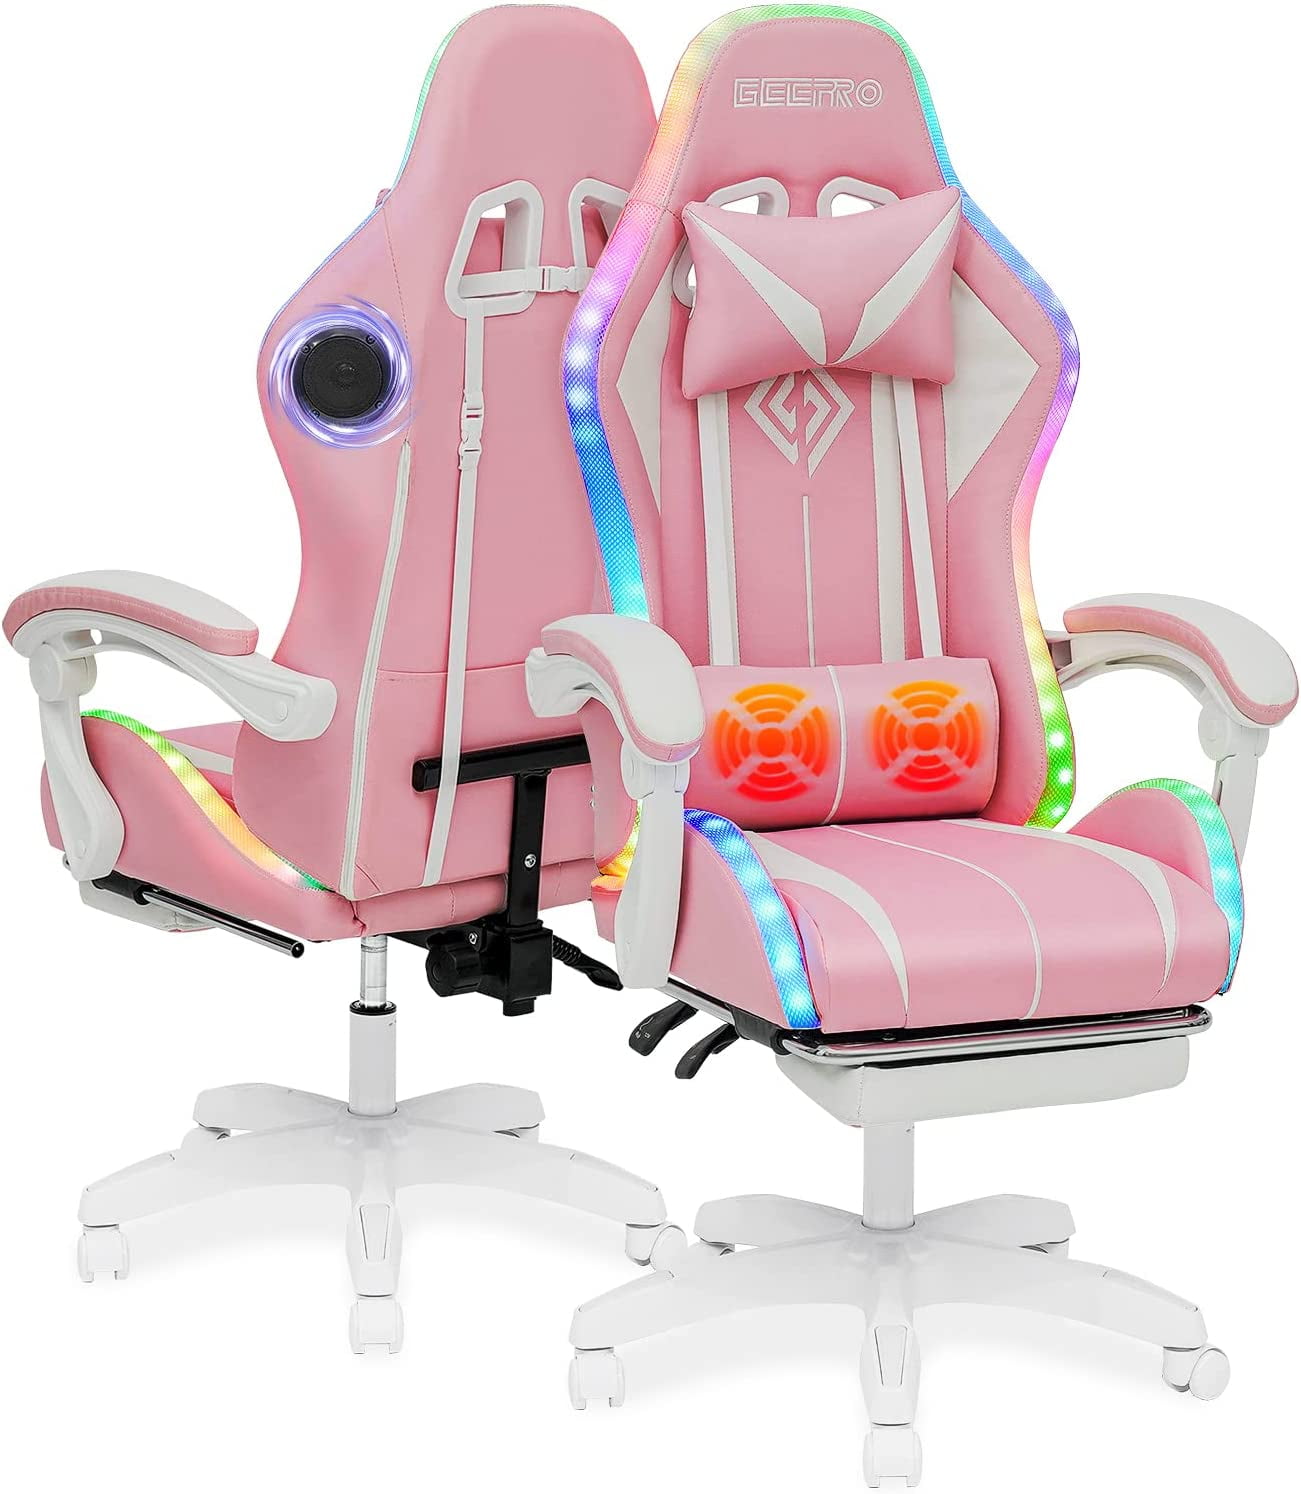 Hoffree Gaming Chair with Bluetooth Speakers and Footrest Massage